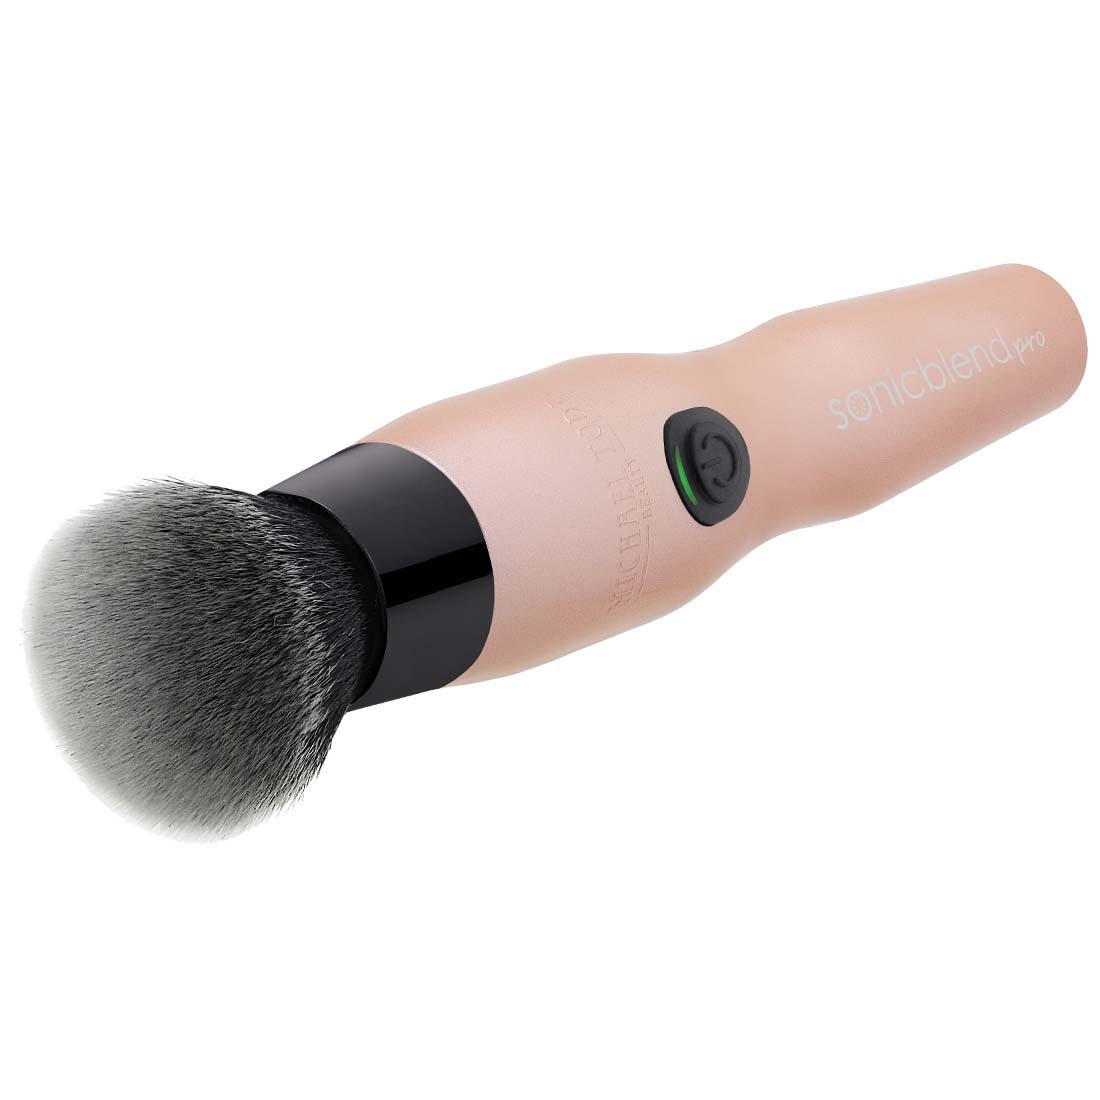 Rose Gold Sonicblend Pro Sonic Makeup Application Brush